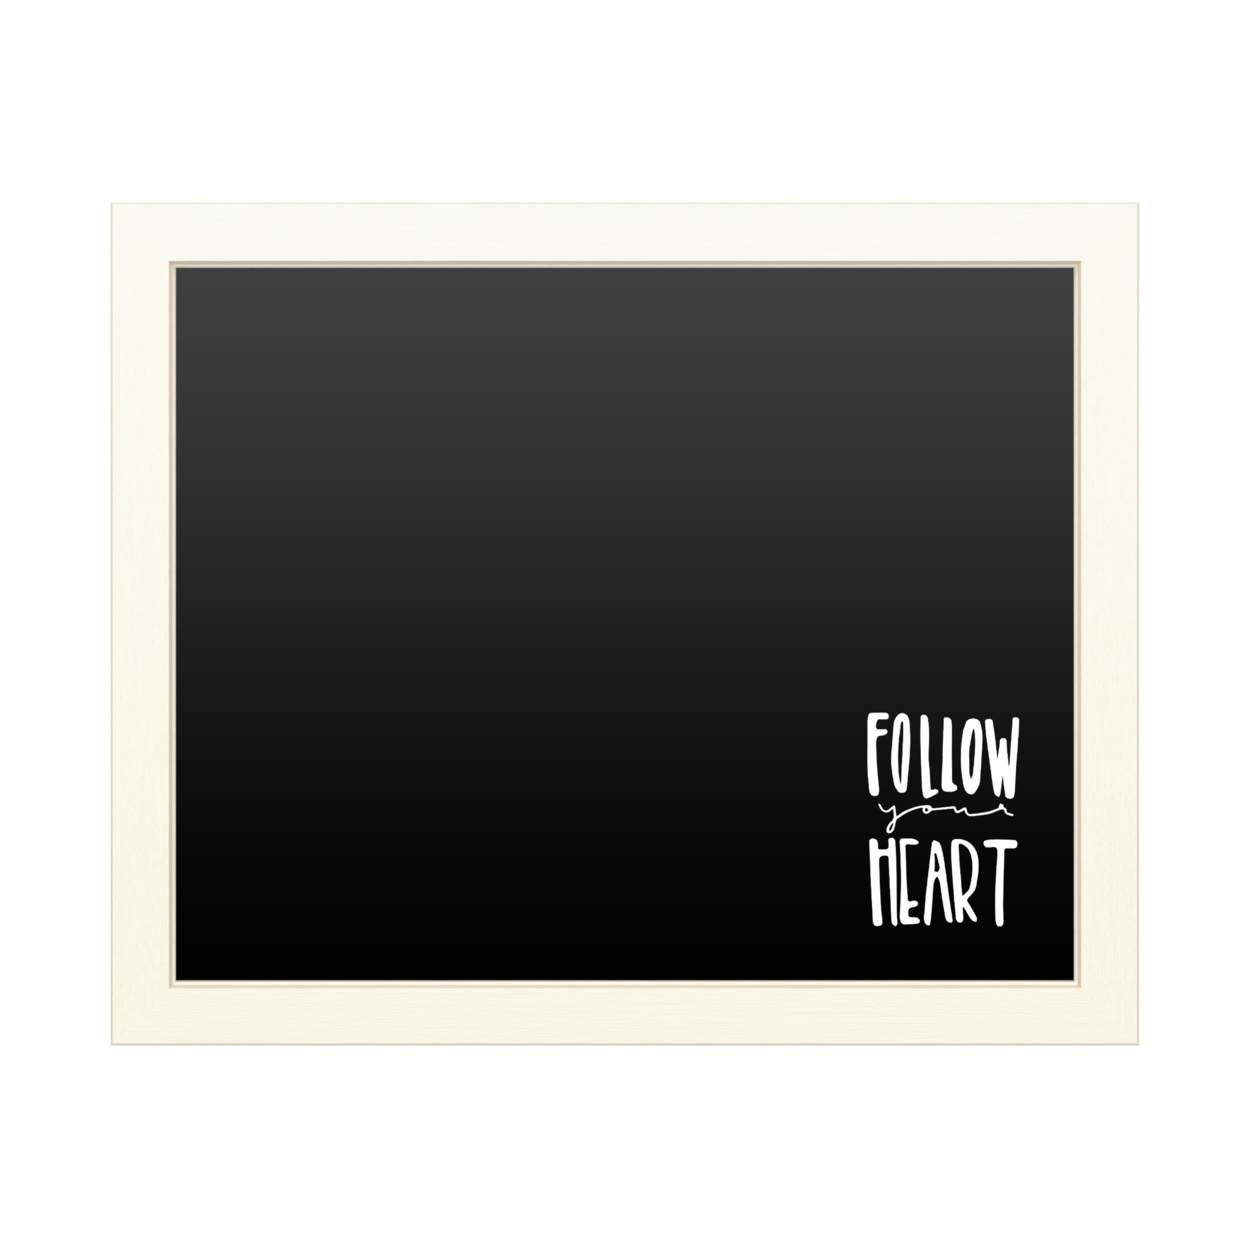 16 X 20 Chalk Board With Printed Artwork - Follow Your Heart White Board - Ready To Hang Chalkboard